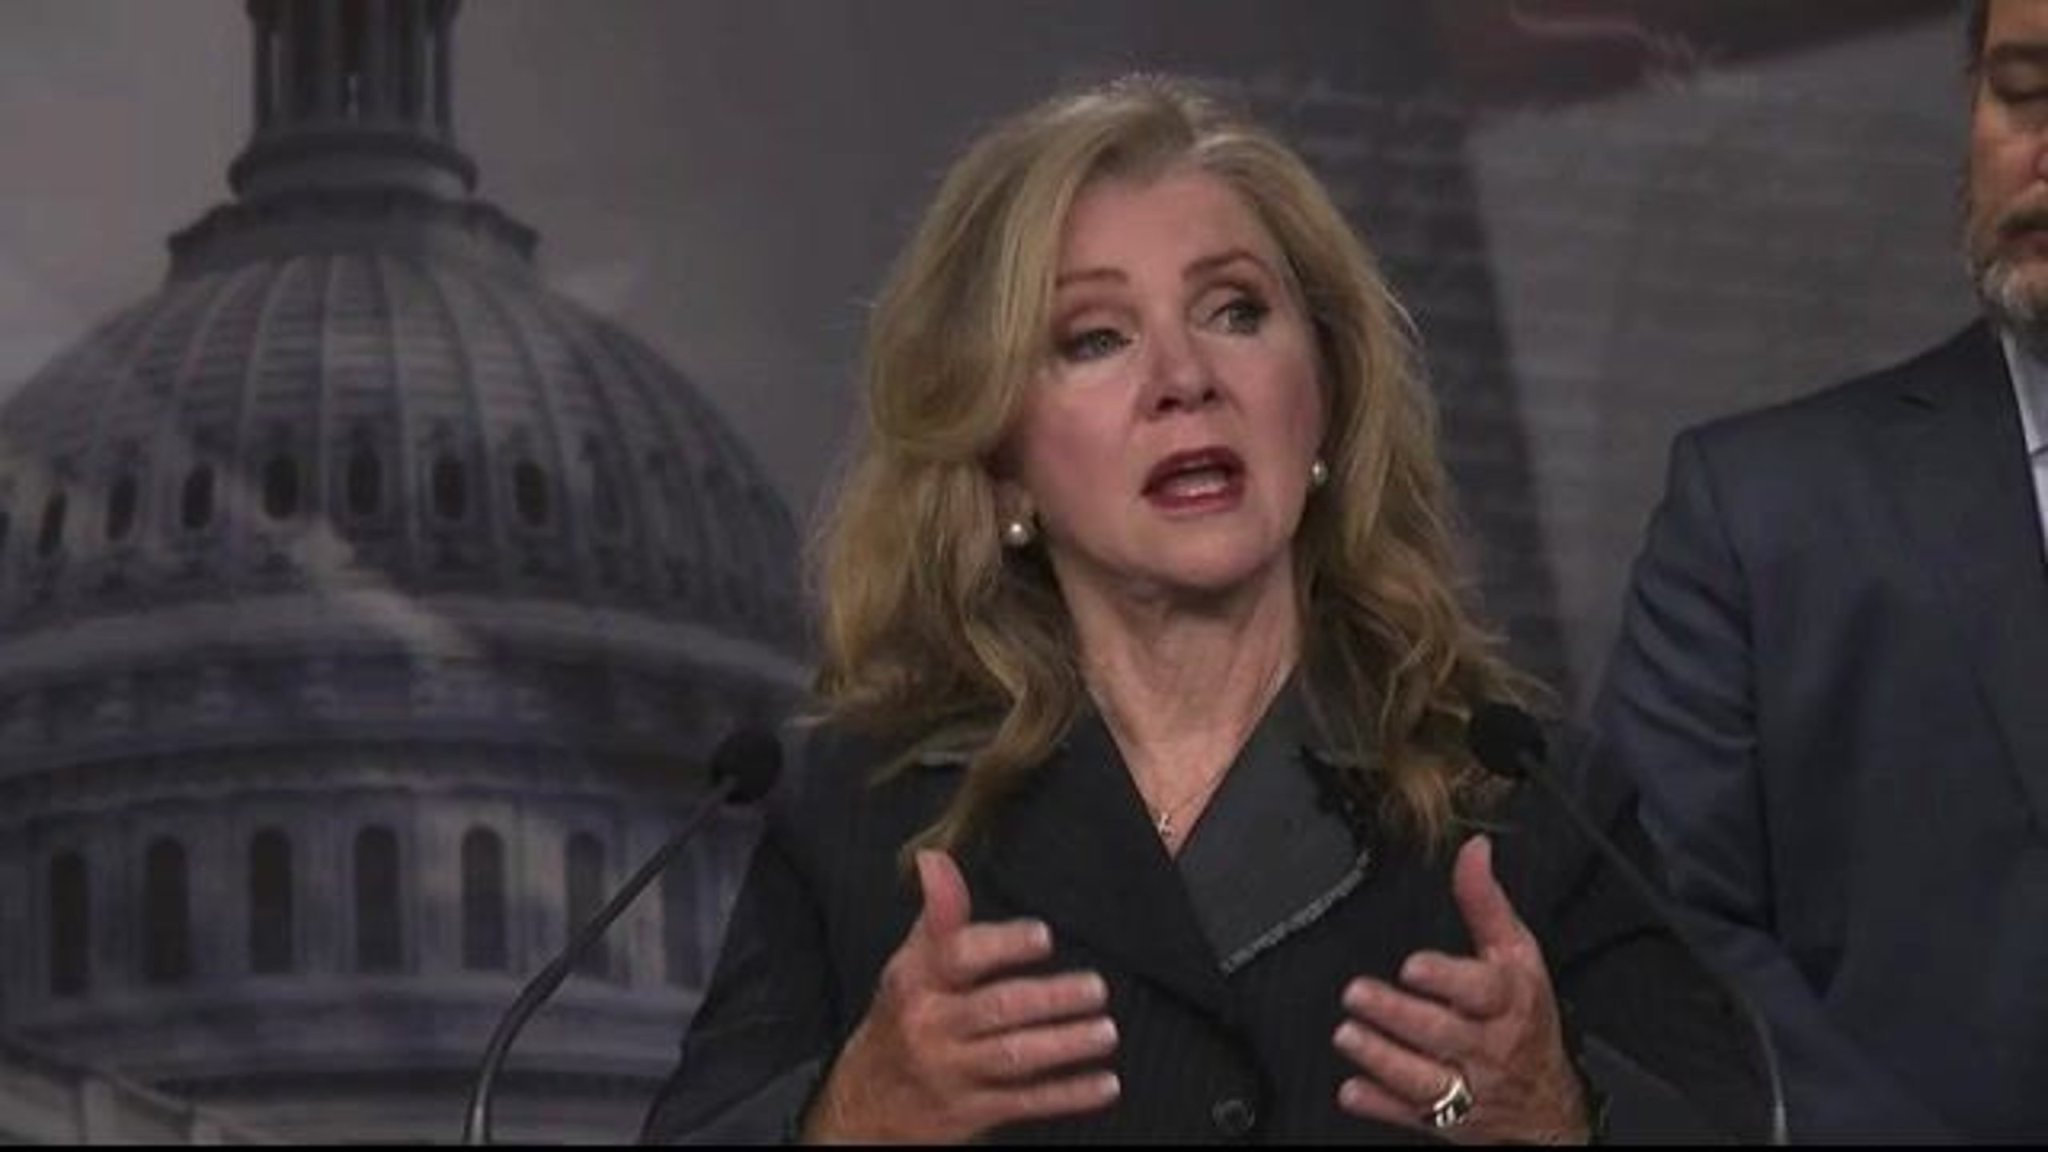 Sen. Blackburn (R-TN) on Judge Jackson not giving a definition of the word woman: “They’re trying to erase woman.”